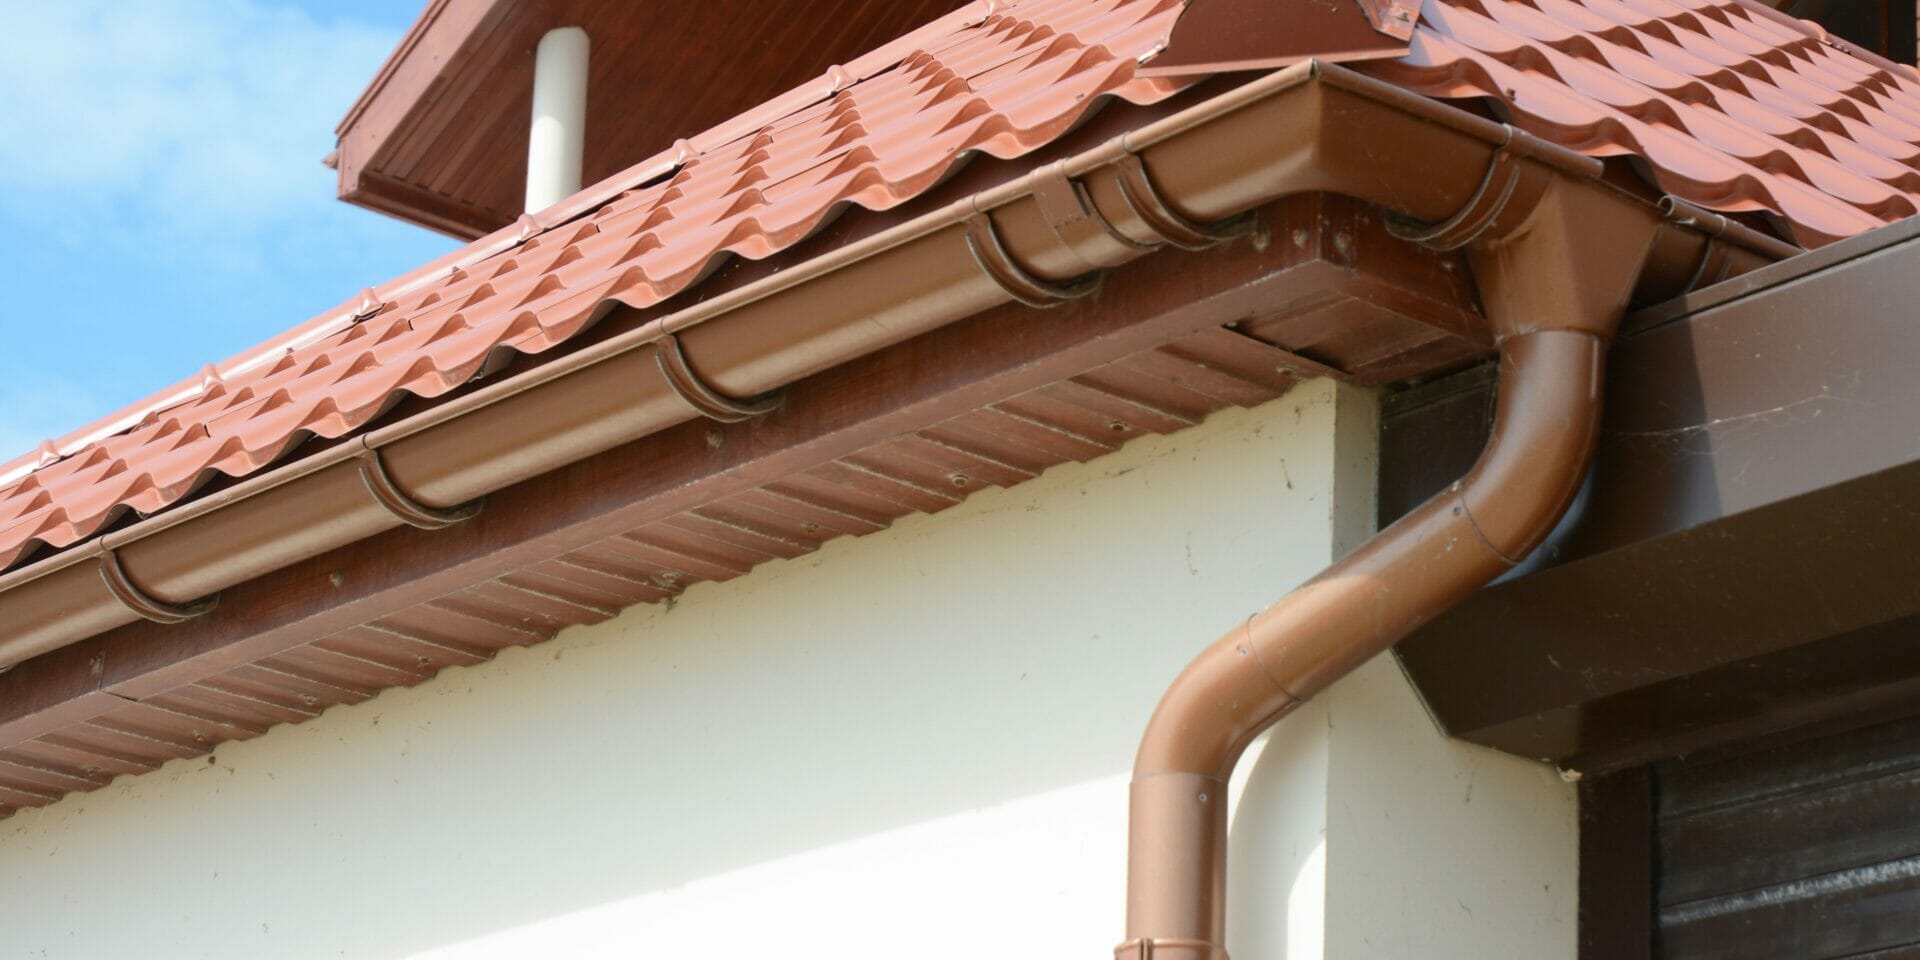 Gutters and Downspouts
gutters